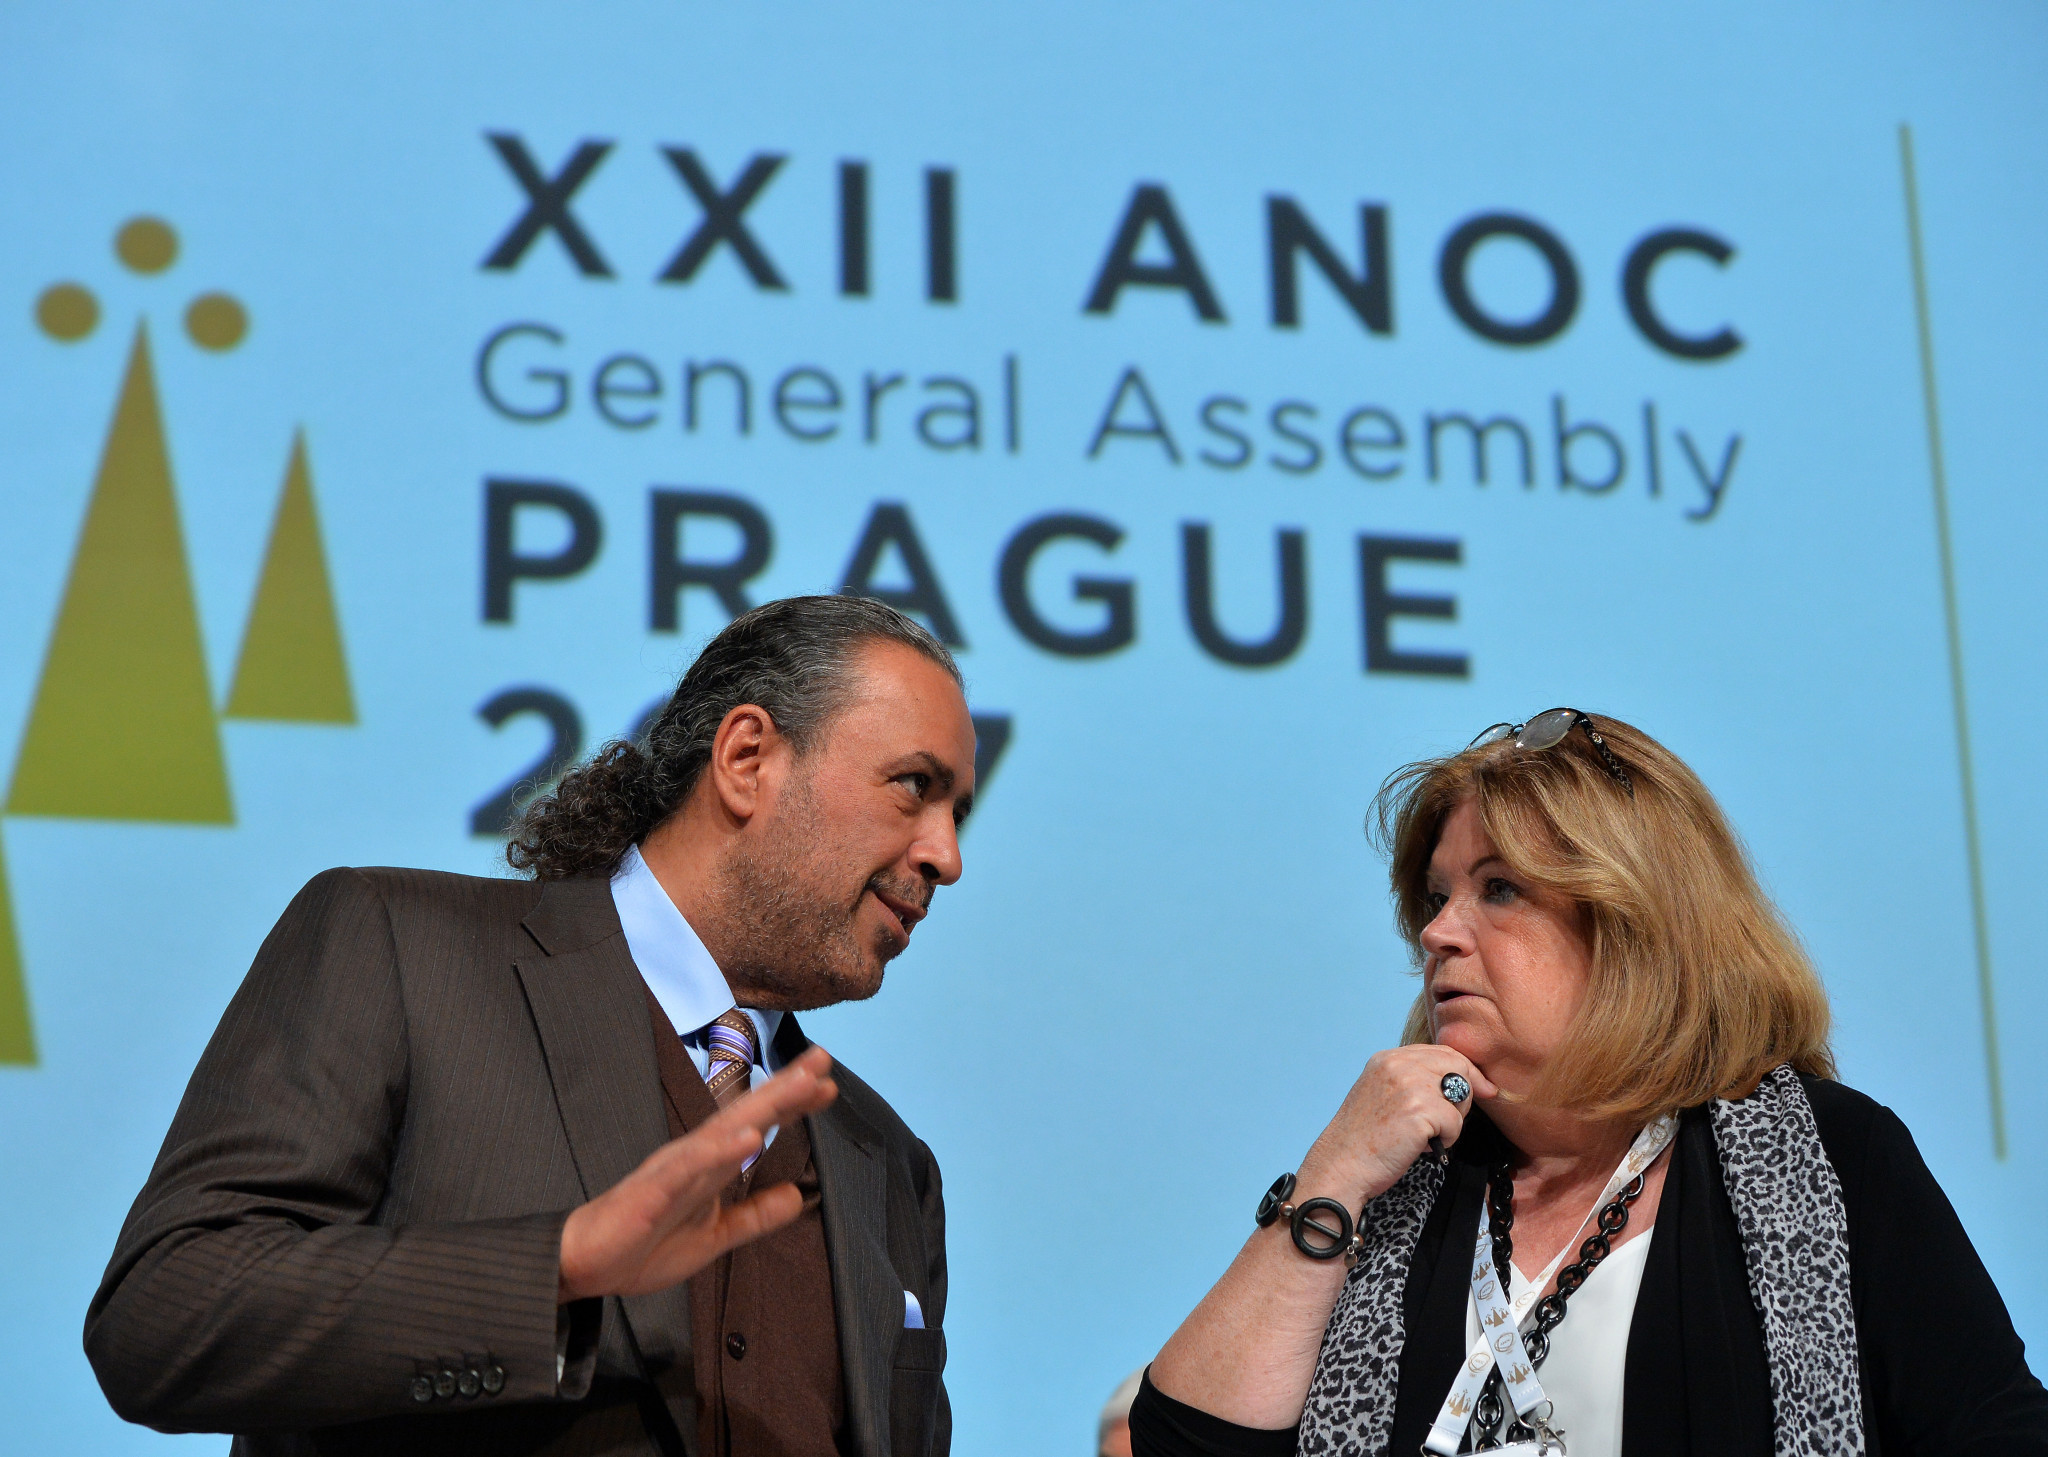 Sheikh Ahmad, left, pictured with ANOC secretary general Gunilla Lindberg, praised the success of the ANOC General Assembly in Prague ©Getty Images